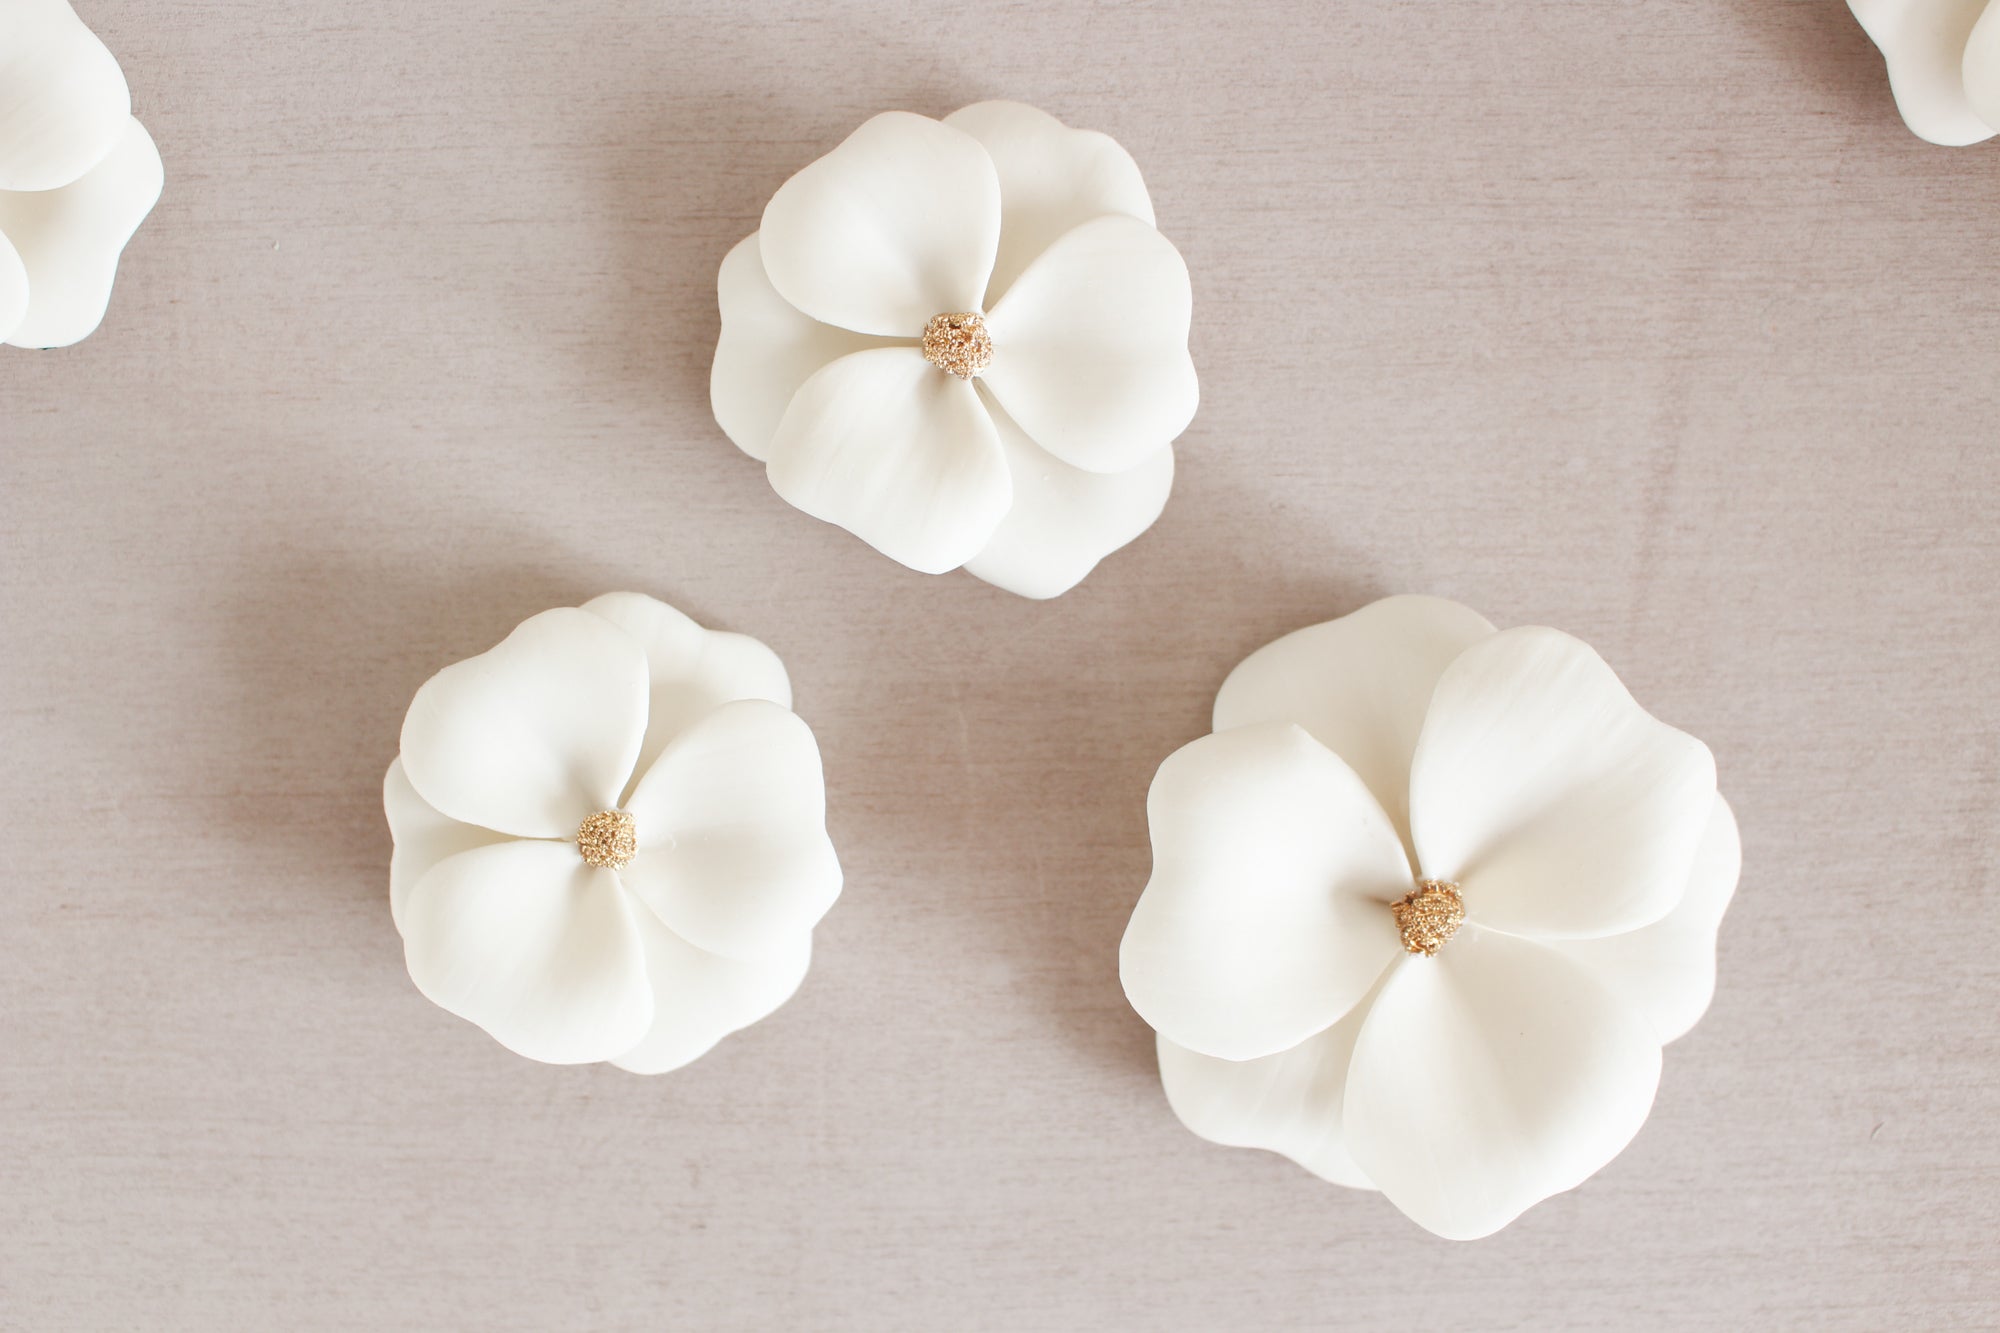 White and Gold Porcelain Flower for Wall Decoration, Frames and Panels by Alain Granell - Handmade in France